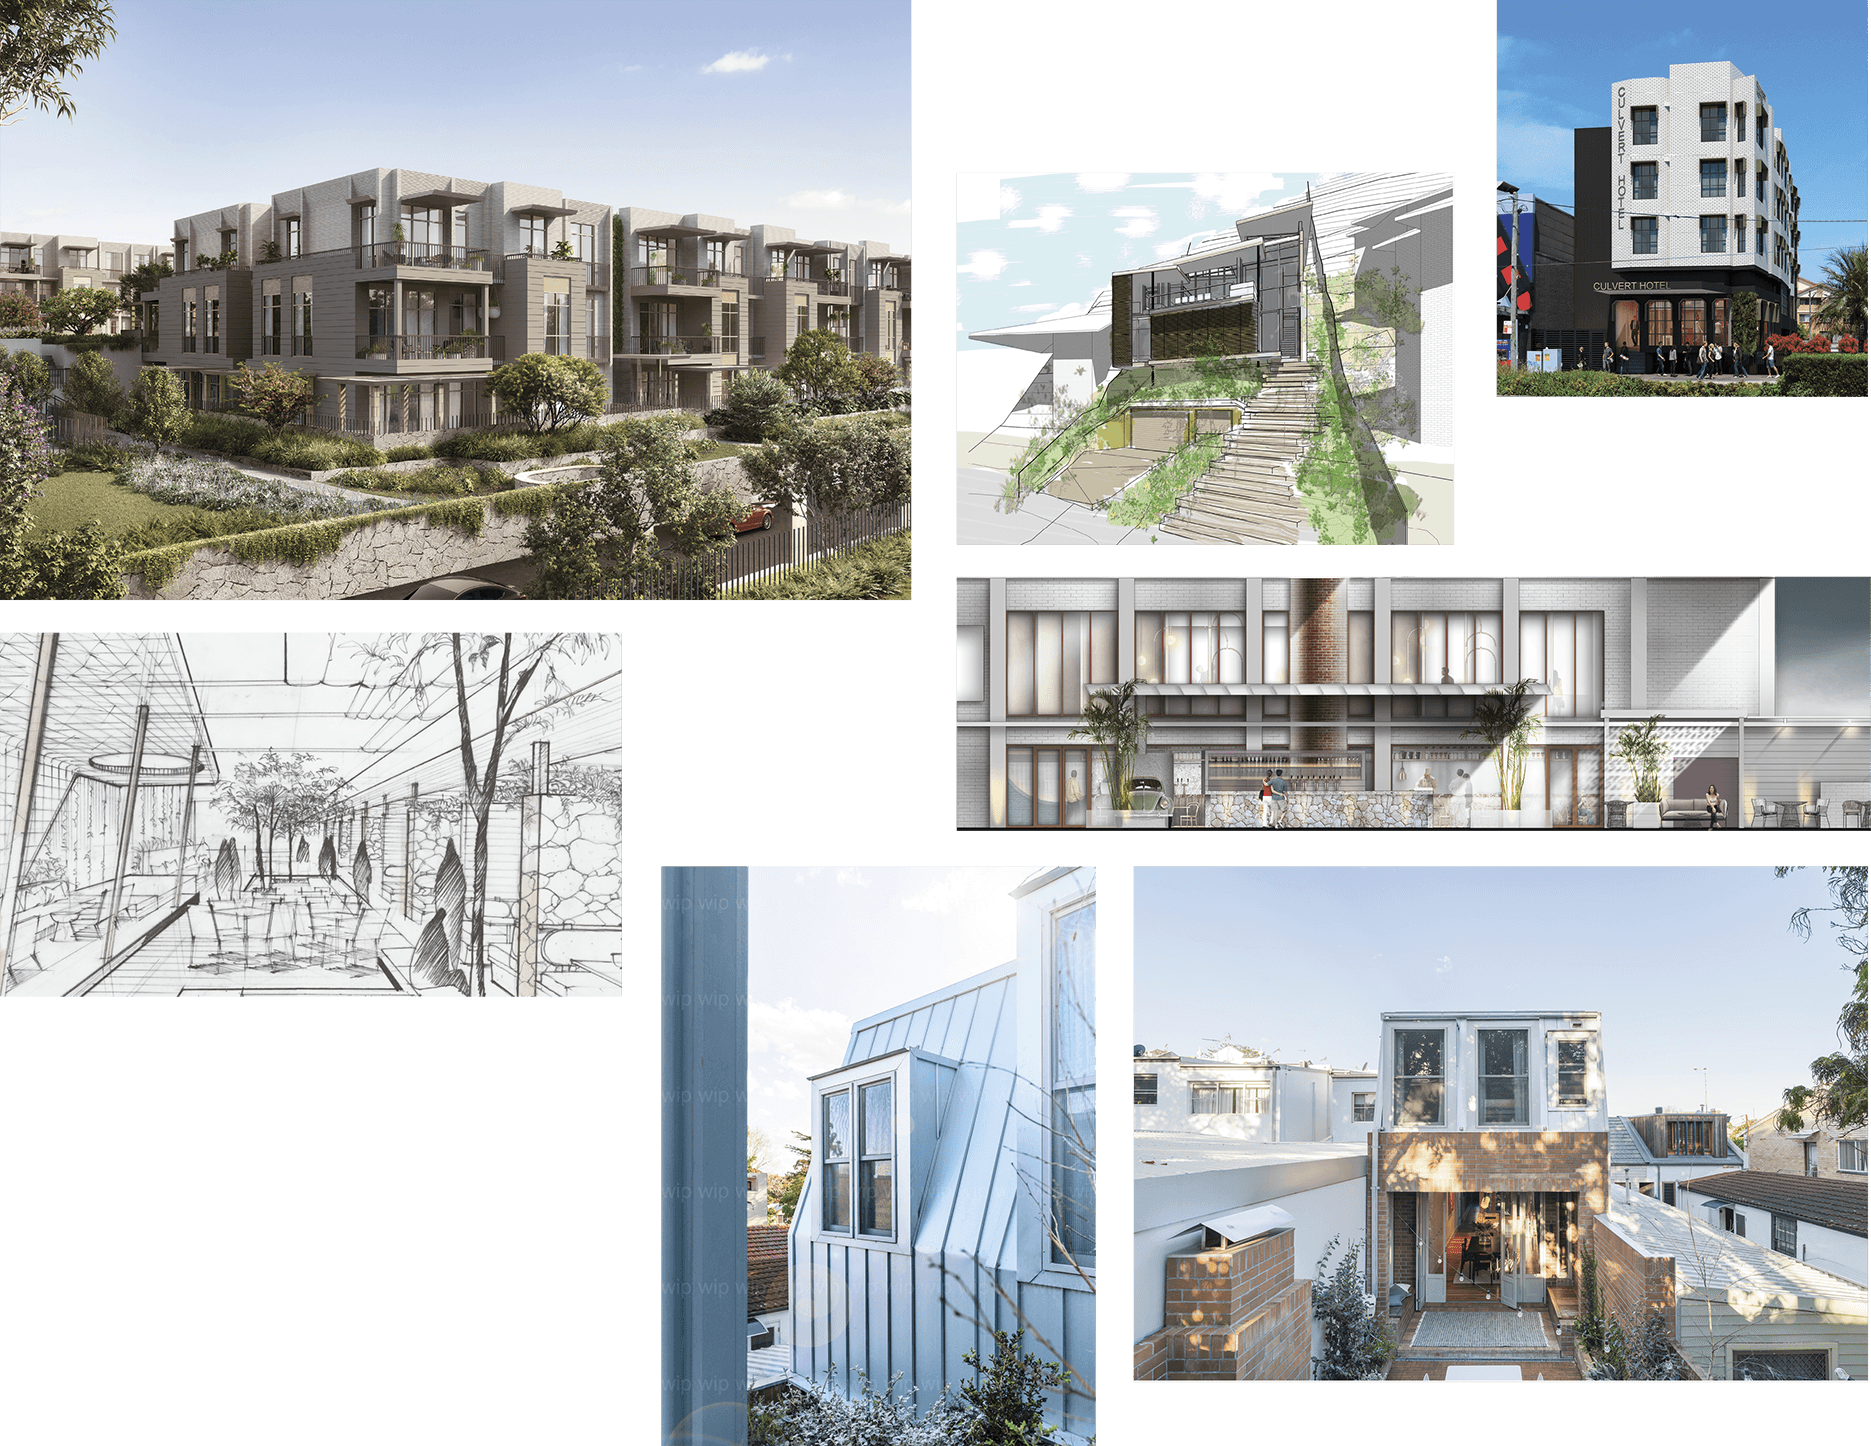 A collage of architectural design concepts.